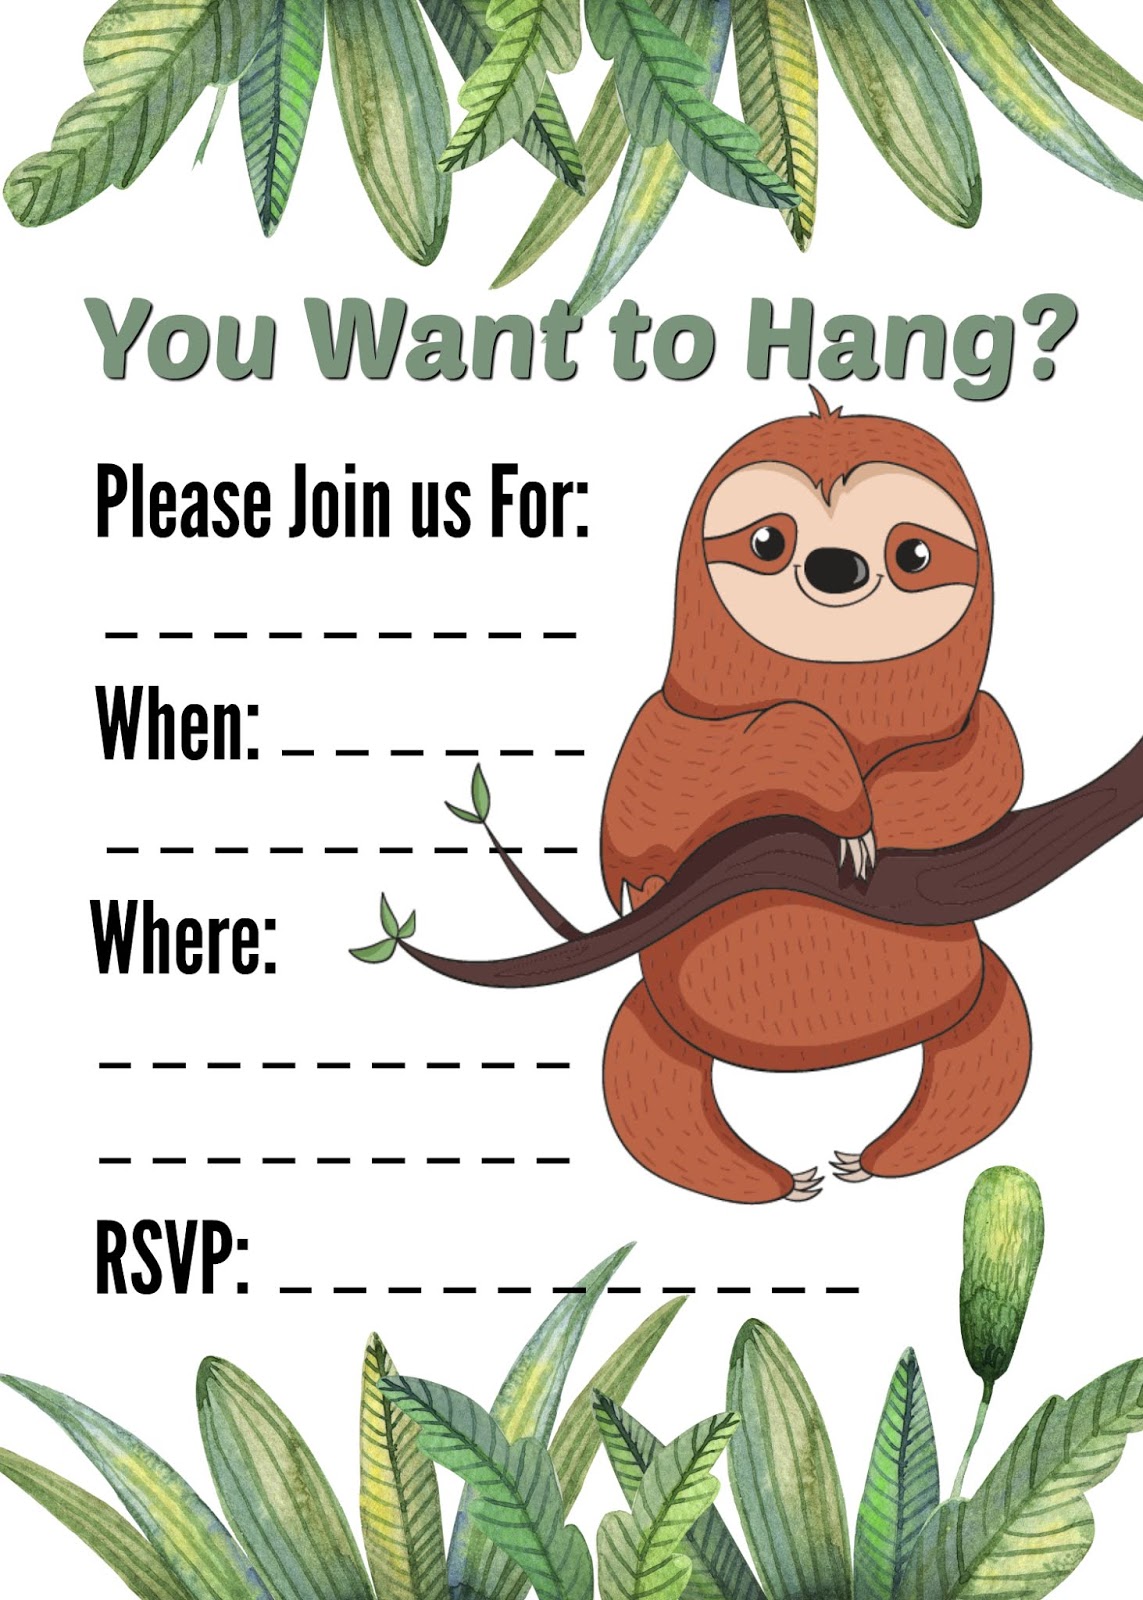 Paper Party Supplies Sloth Template 4x6 5x7 Zoo Invitation Sloth 